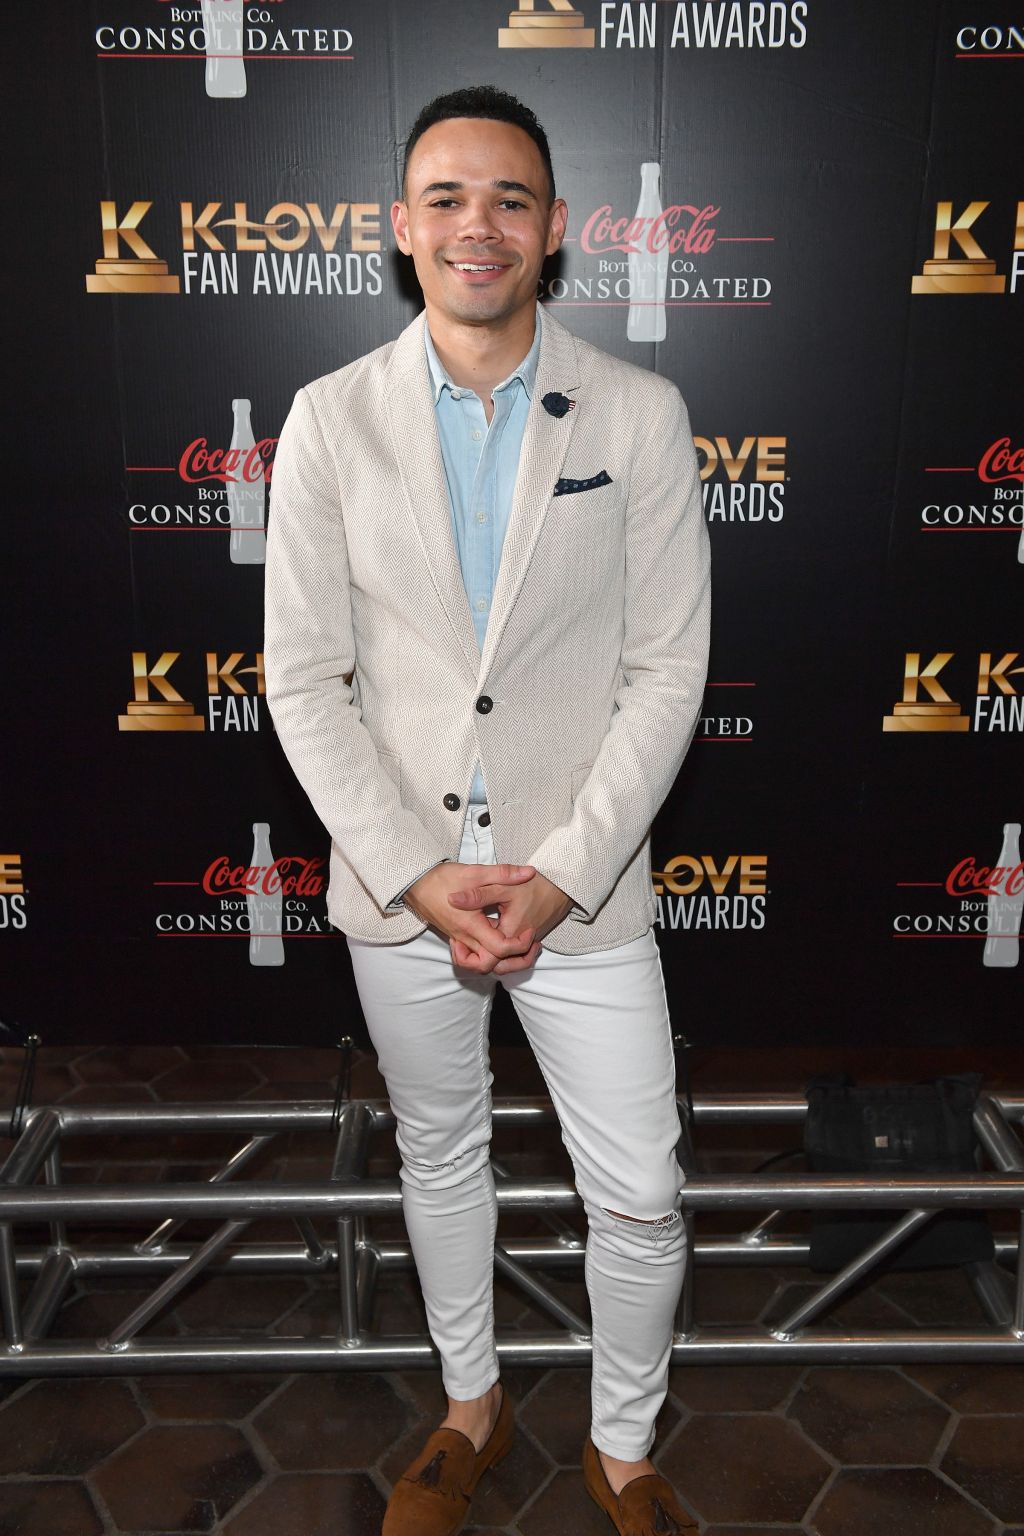 6th Annual KLOVE Fan Awards At The Grand Ole Opry House - Arrivals